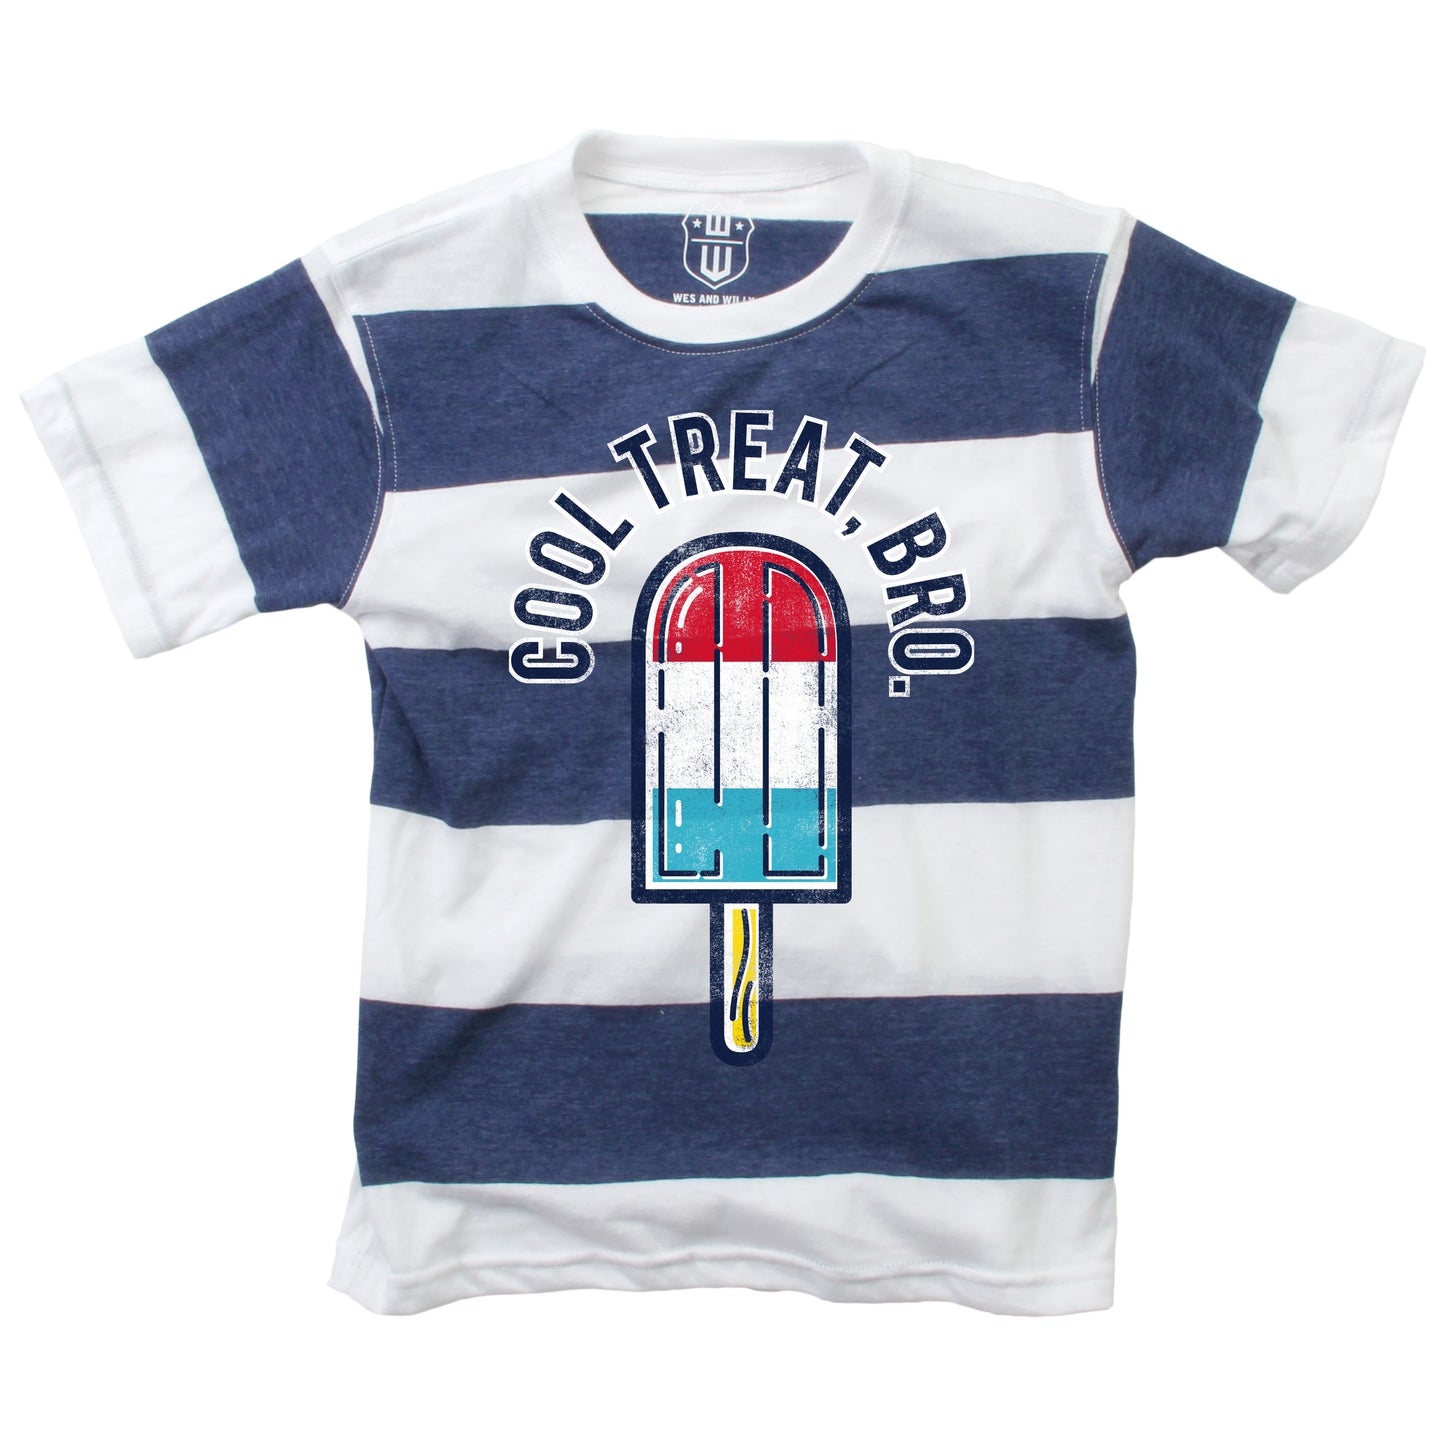 Wes & Willy Cool Treat Sriped S/S Tee